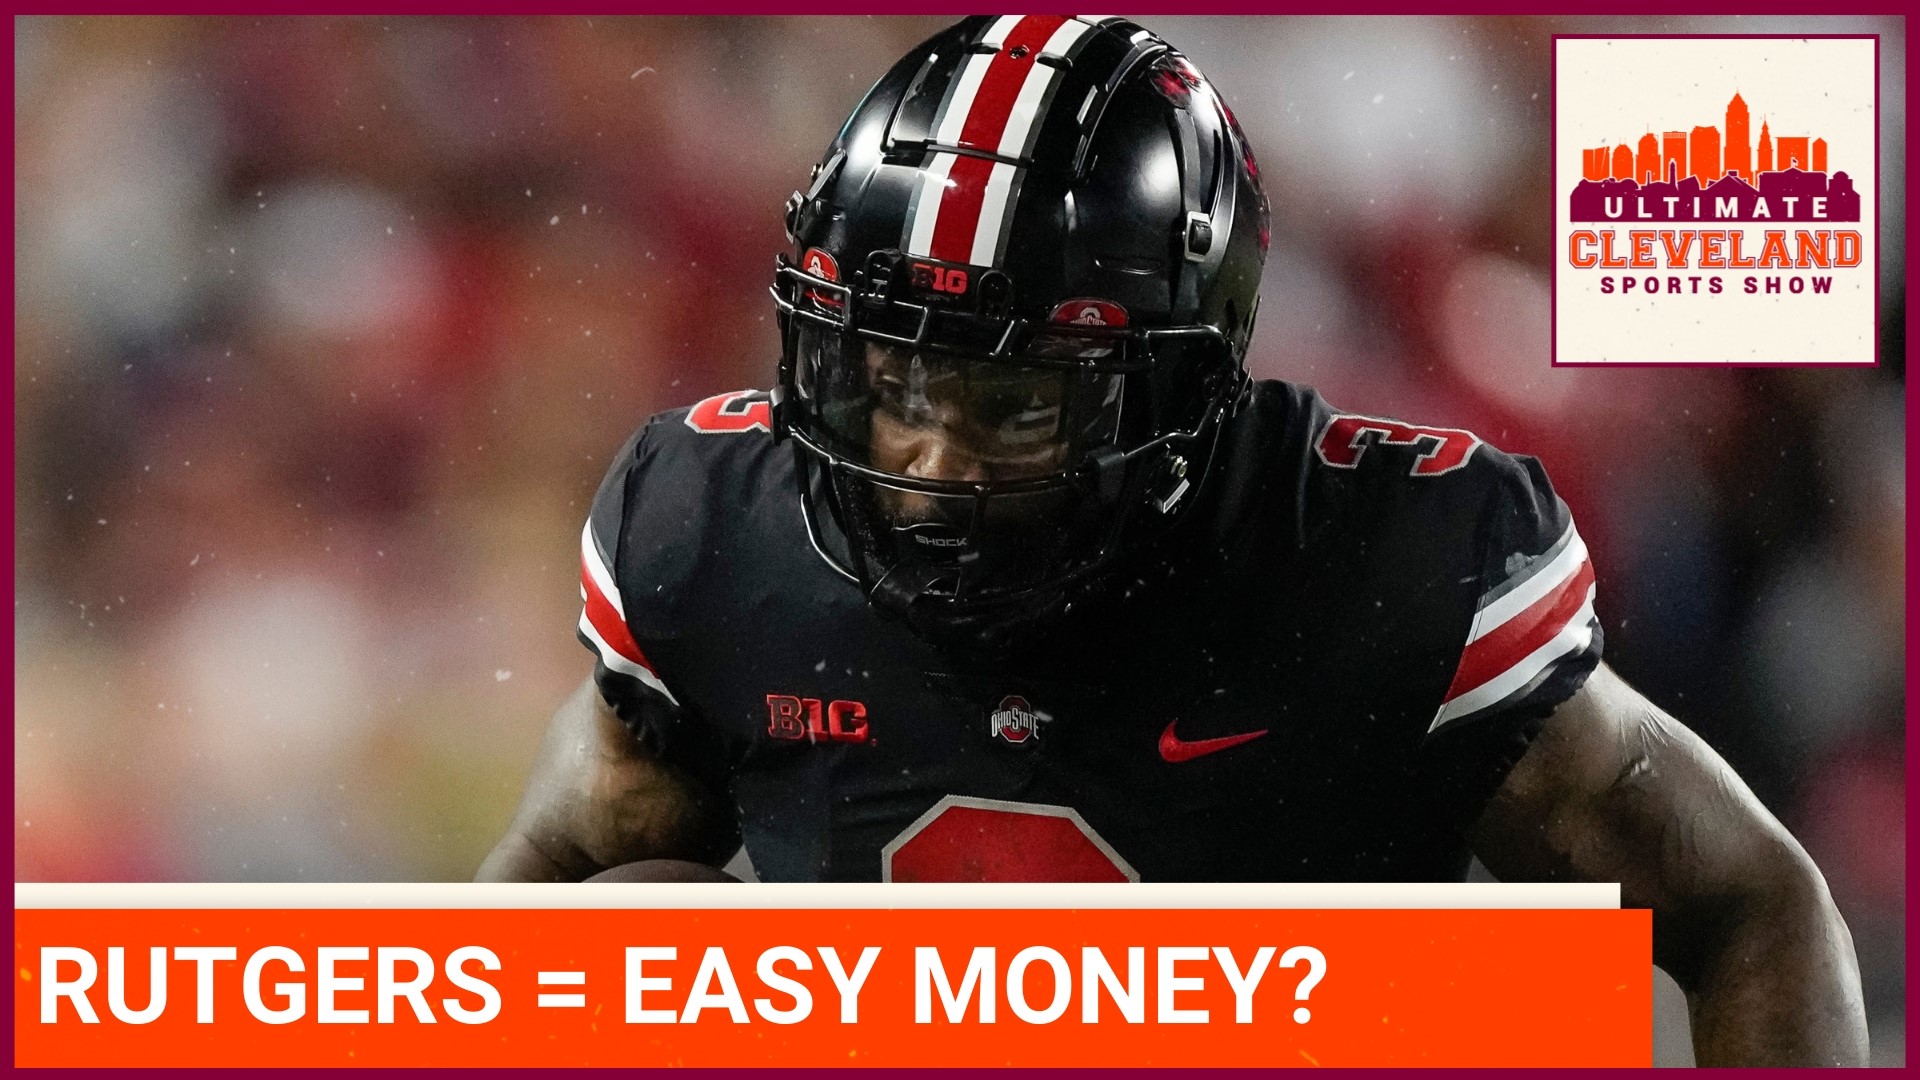 Rutgers should not pose a threat to the Ohio State Buckeyes, can OSU put them away quick?